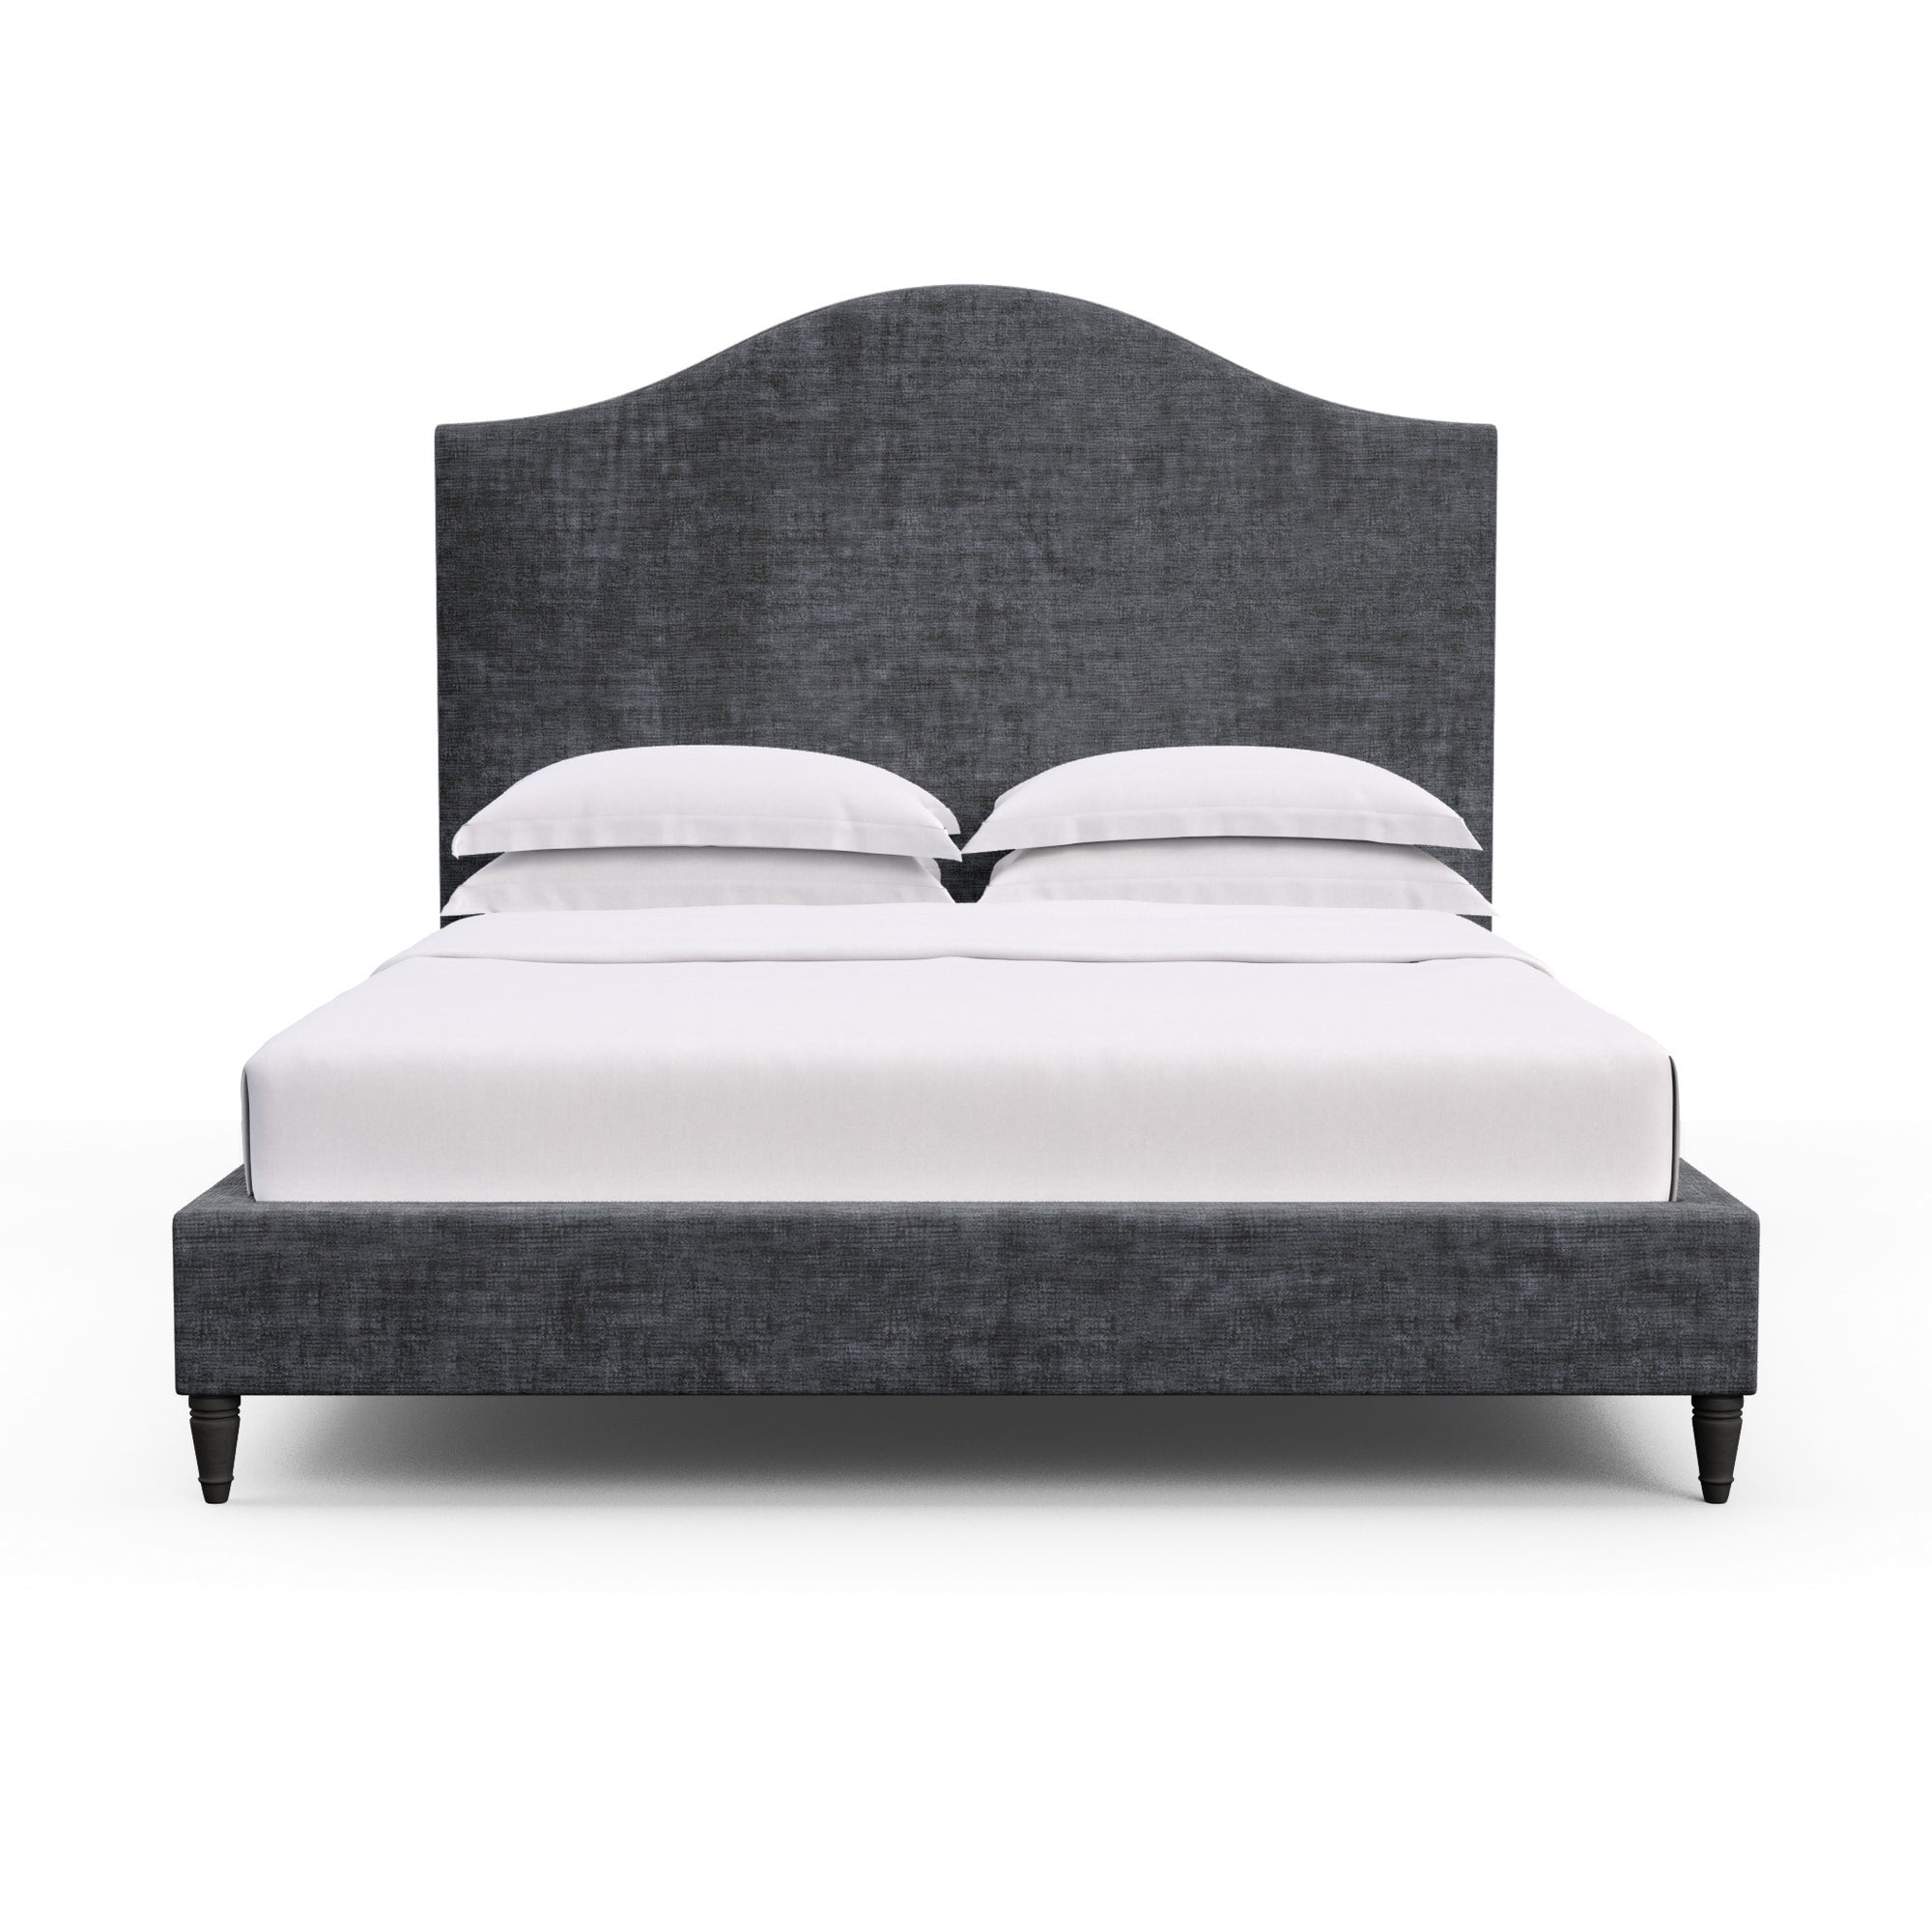 Montague Arched Panel Bed - Graphite Crushed Velvet